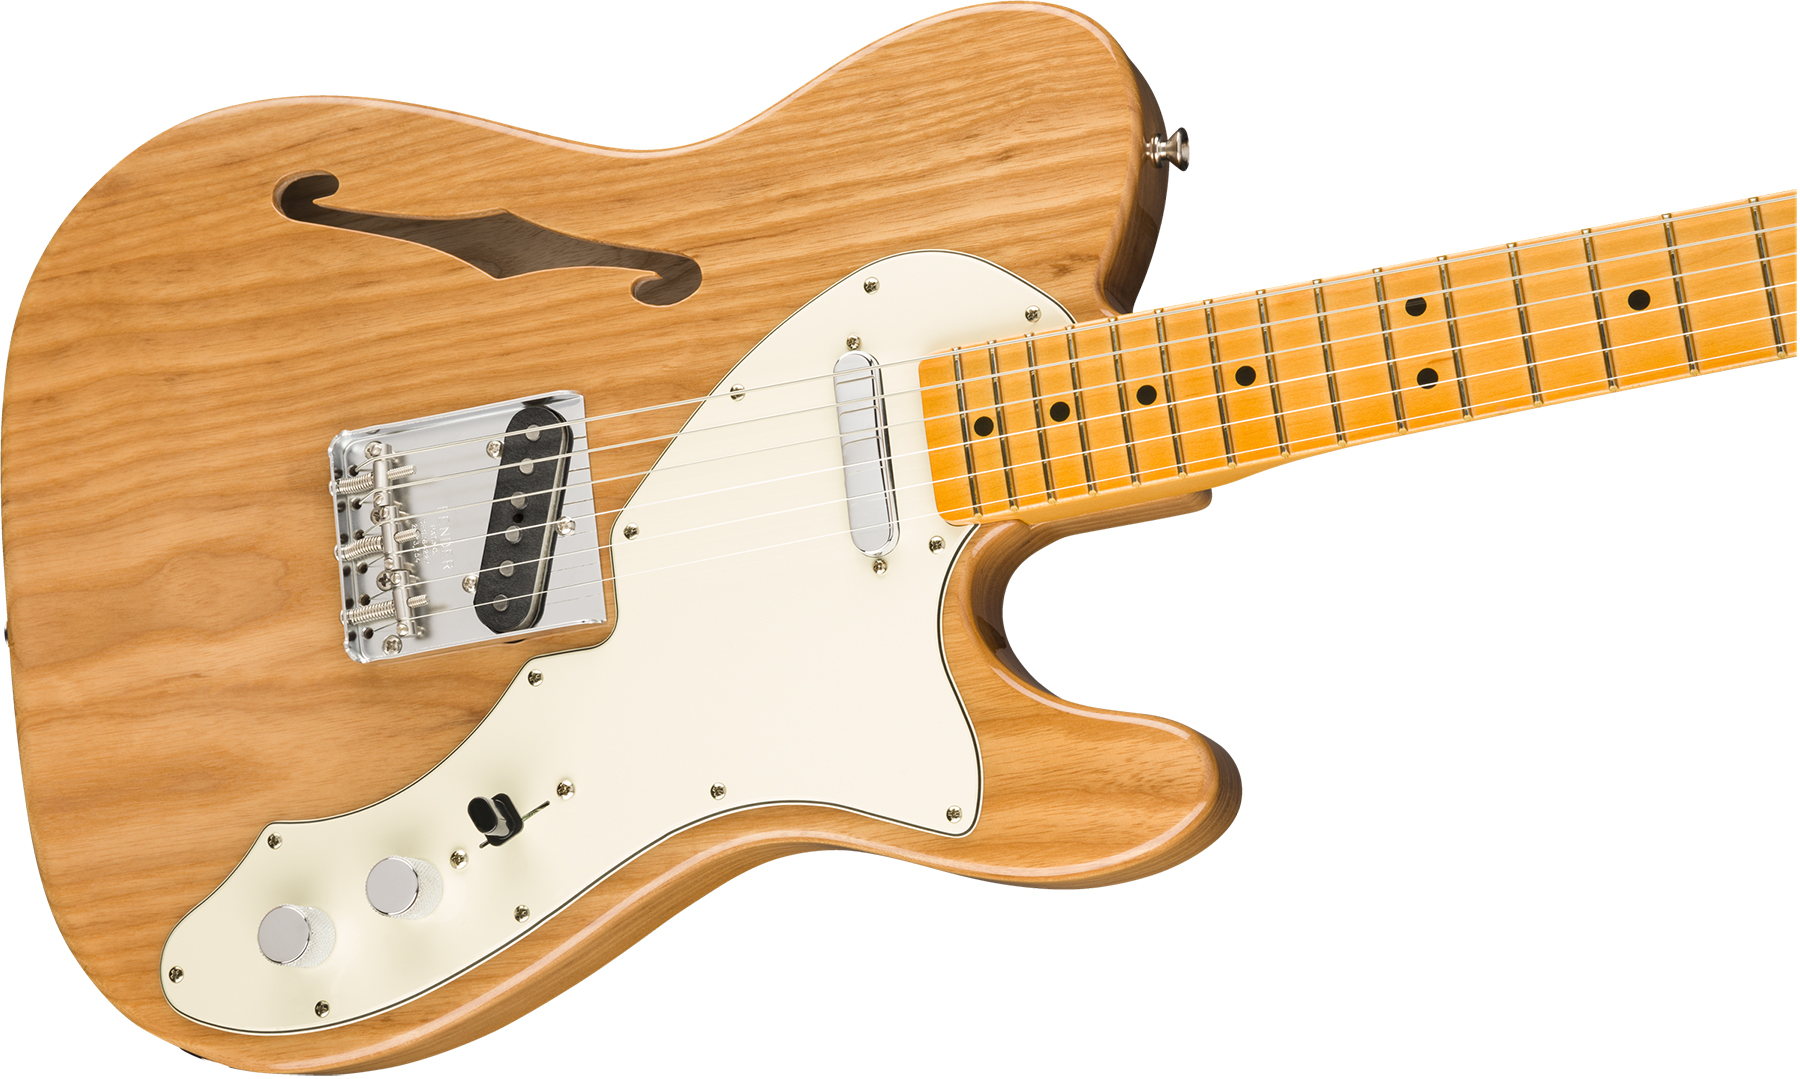 Fender Tele 60s Thinline American Original Usa Ss Mn - Aged Natural - Semi-hollow electric guitar - Variation 2